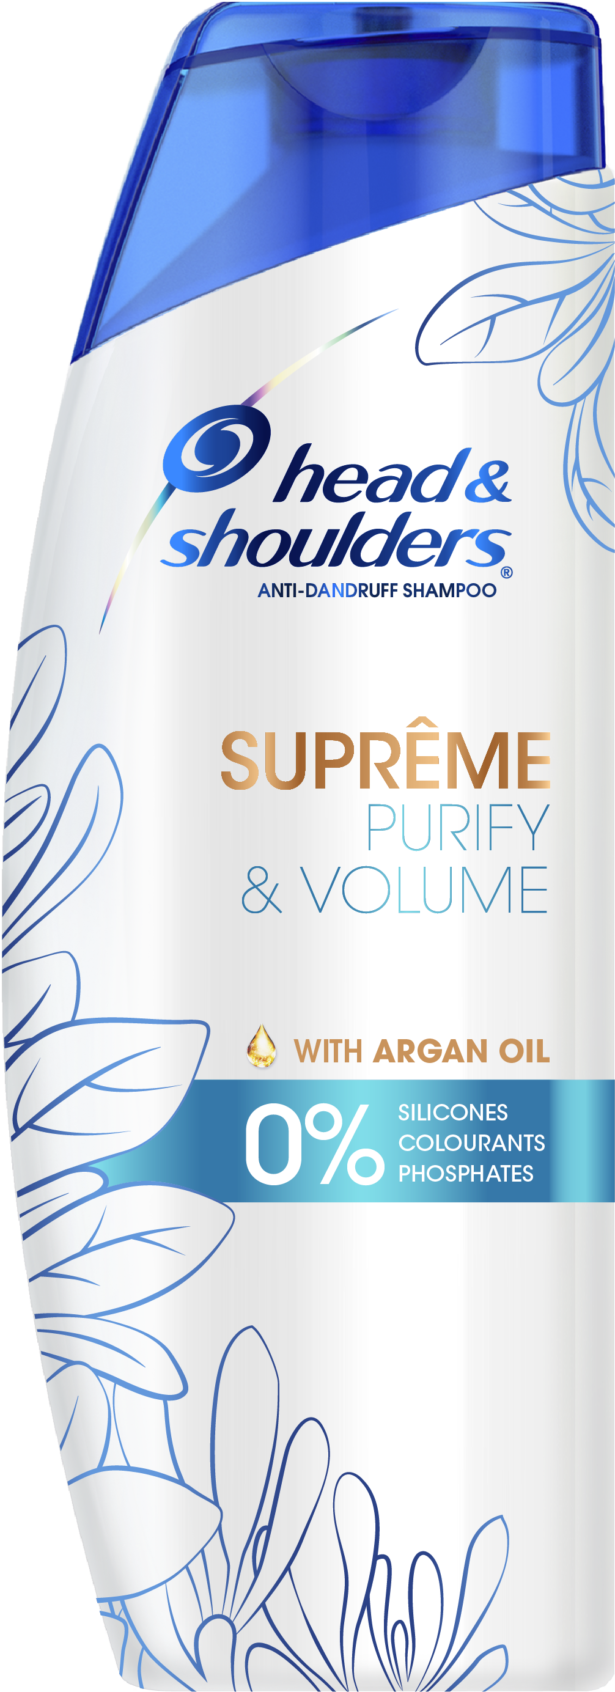 HEAD & SHOULDERS LAUNCHES SUPREME PURIFY & VOLUME: â€˜SKINCARE FOR YOUR